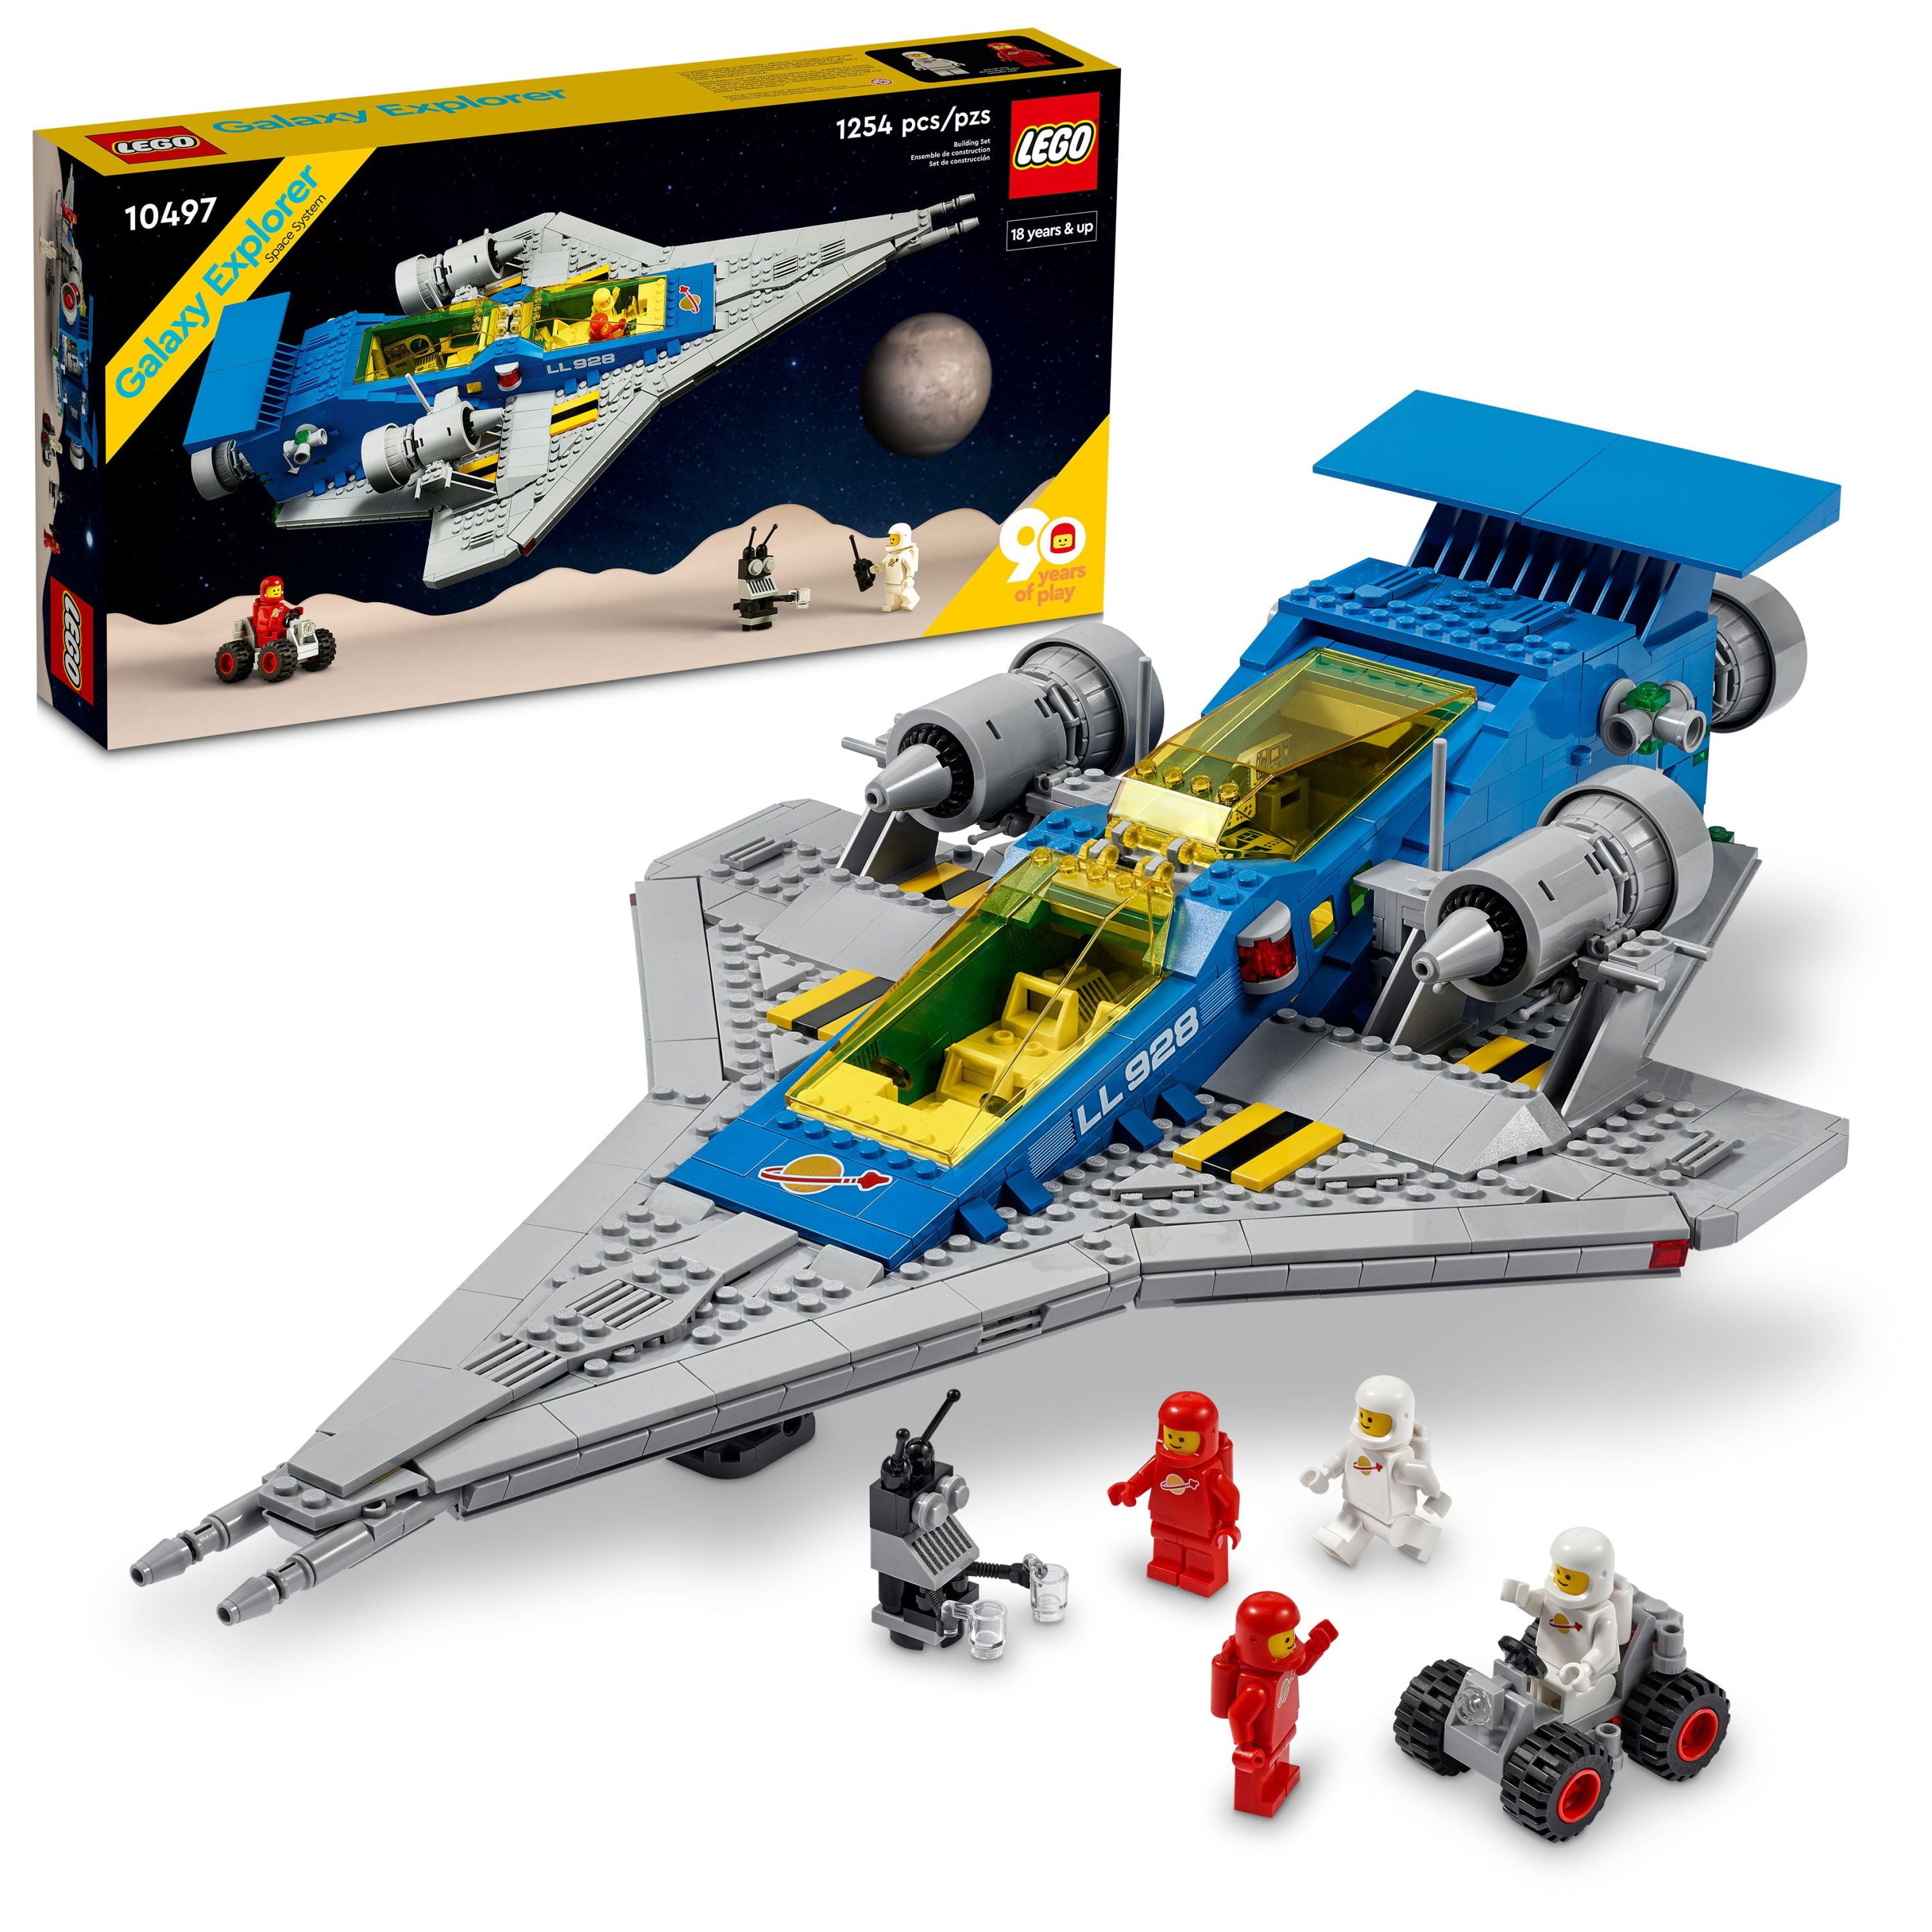 dagsorden Kejser fjendtlighed LEGO Icons Galaxy Explorer 10497 90th Anniversary Collectible Edition Model  Spaceship, Space Building Set with Astronaut Figures, Gift Idea -  Walmart.com